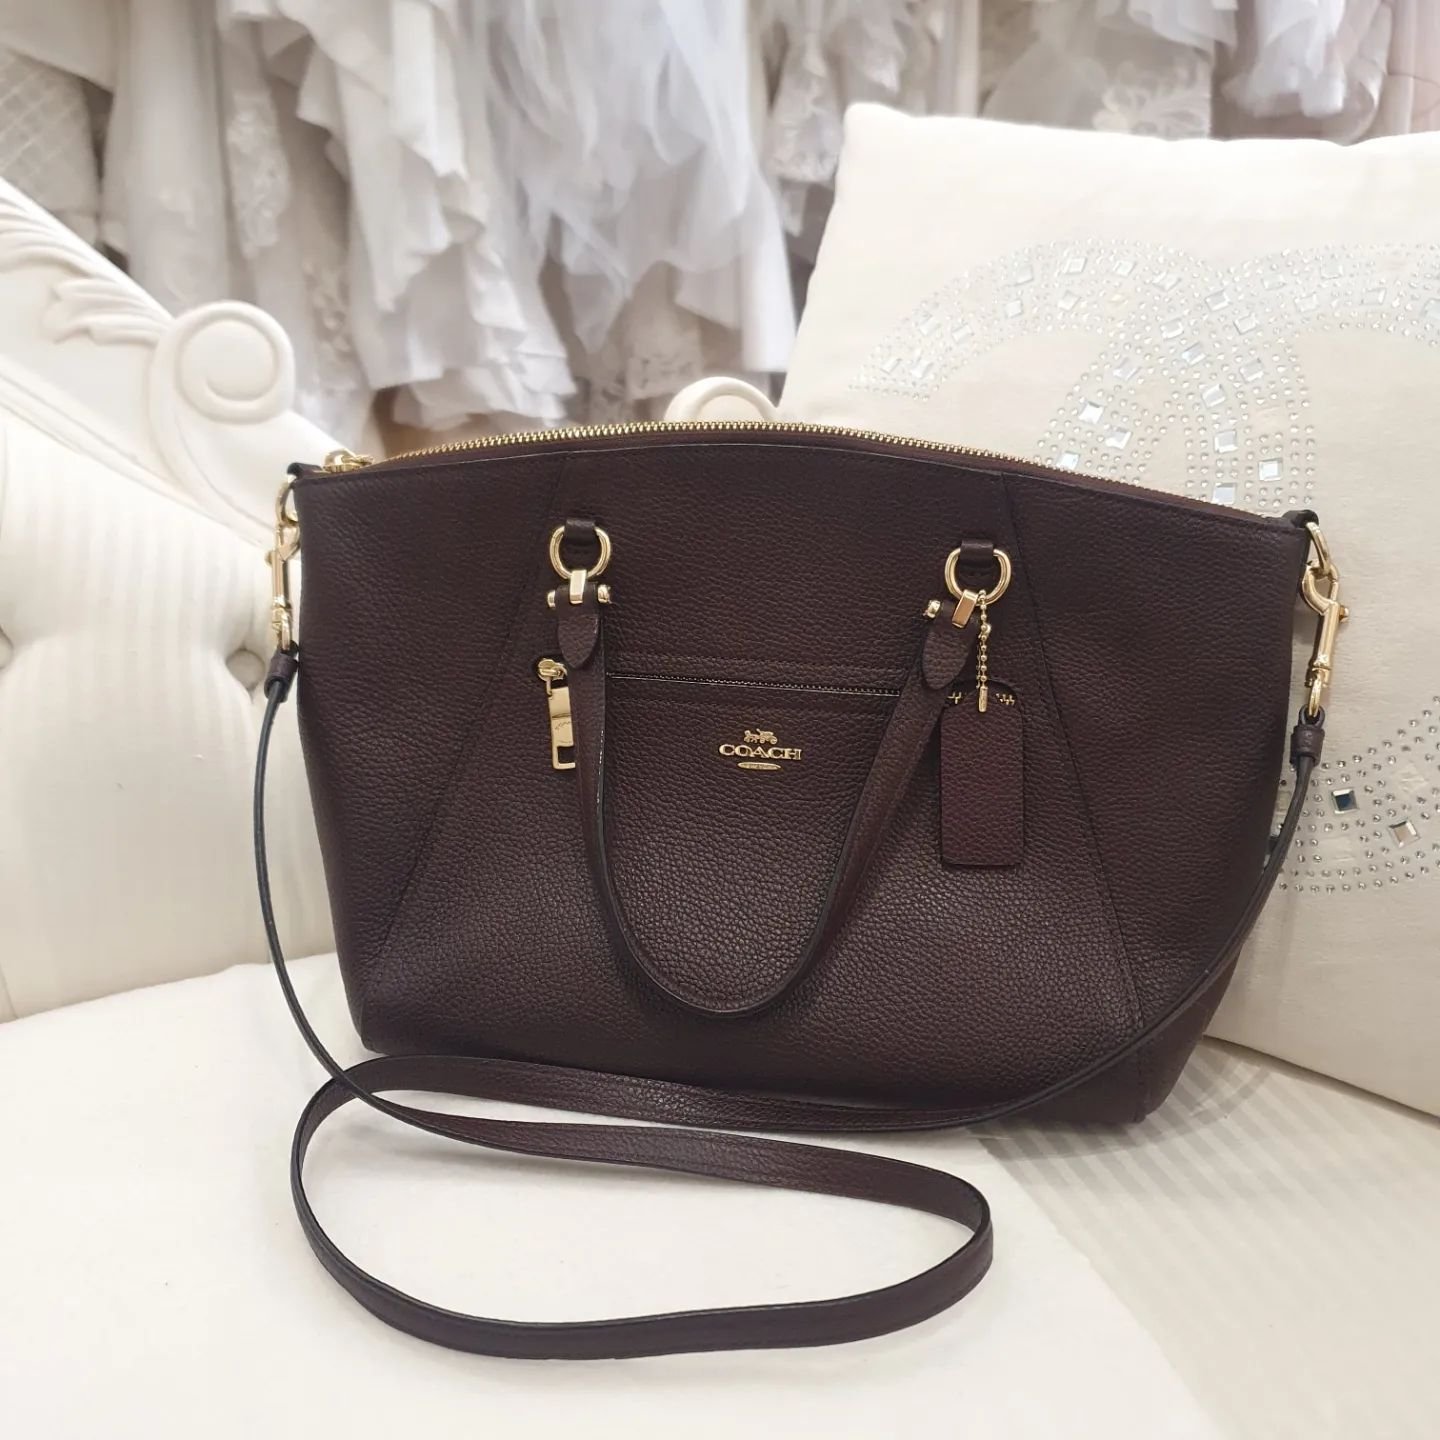 ✨️ New Arrival ✨️

Coach burgundy pebbled leather Prairie Satchel, box and dustbag included

--&gt; $249

(retail price $495)

#coach #coachbag #coachleather #newarrival #perthfashion #prelovedfashion #perthconsignment #eventwear #occasionwear #susta